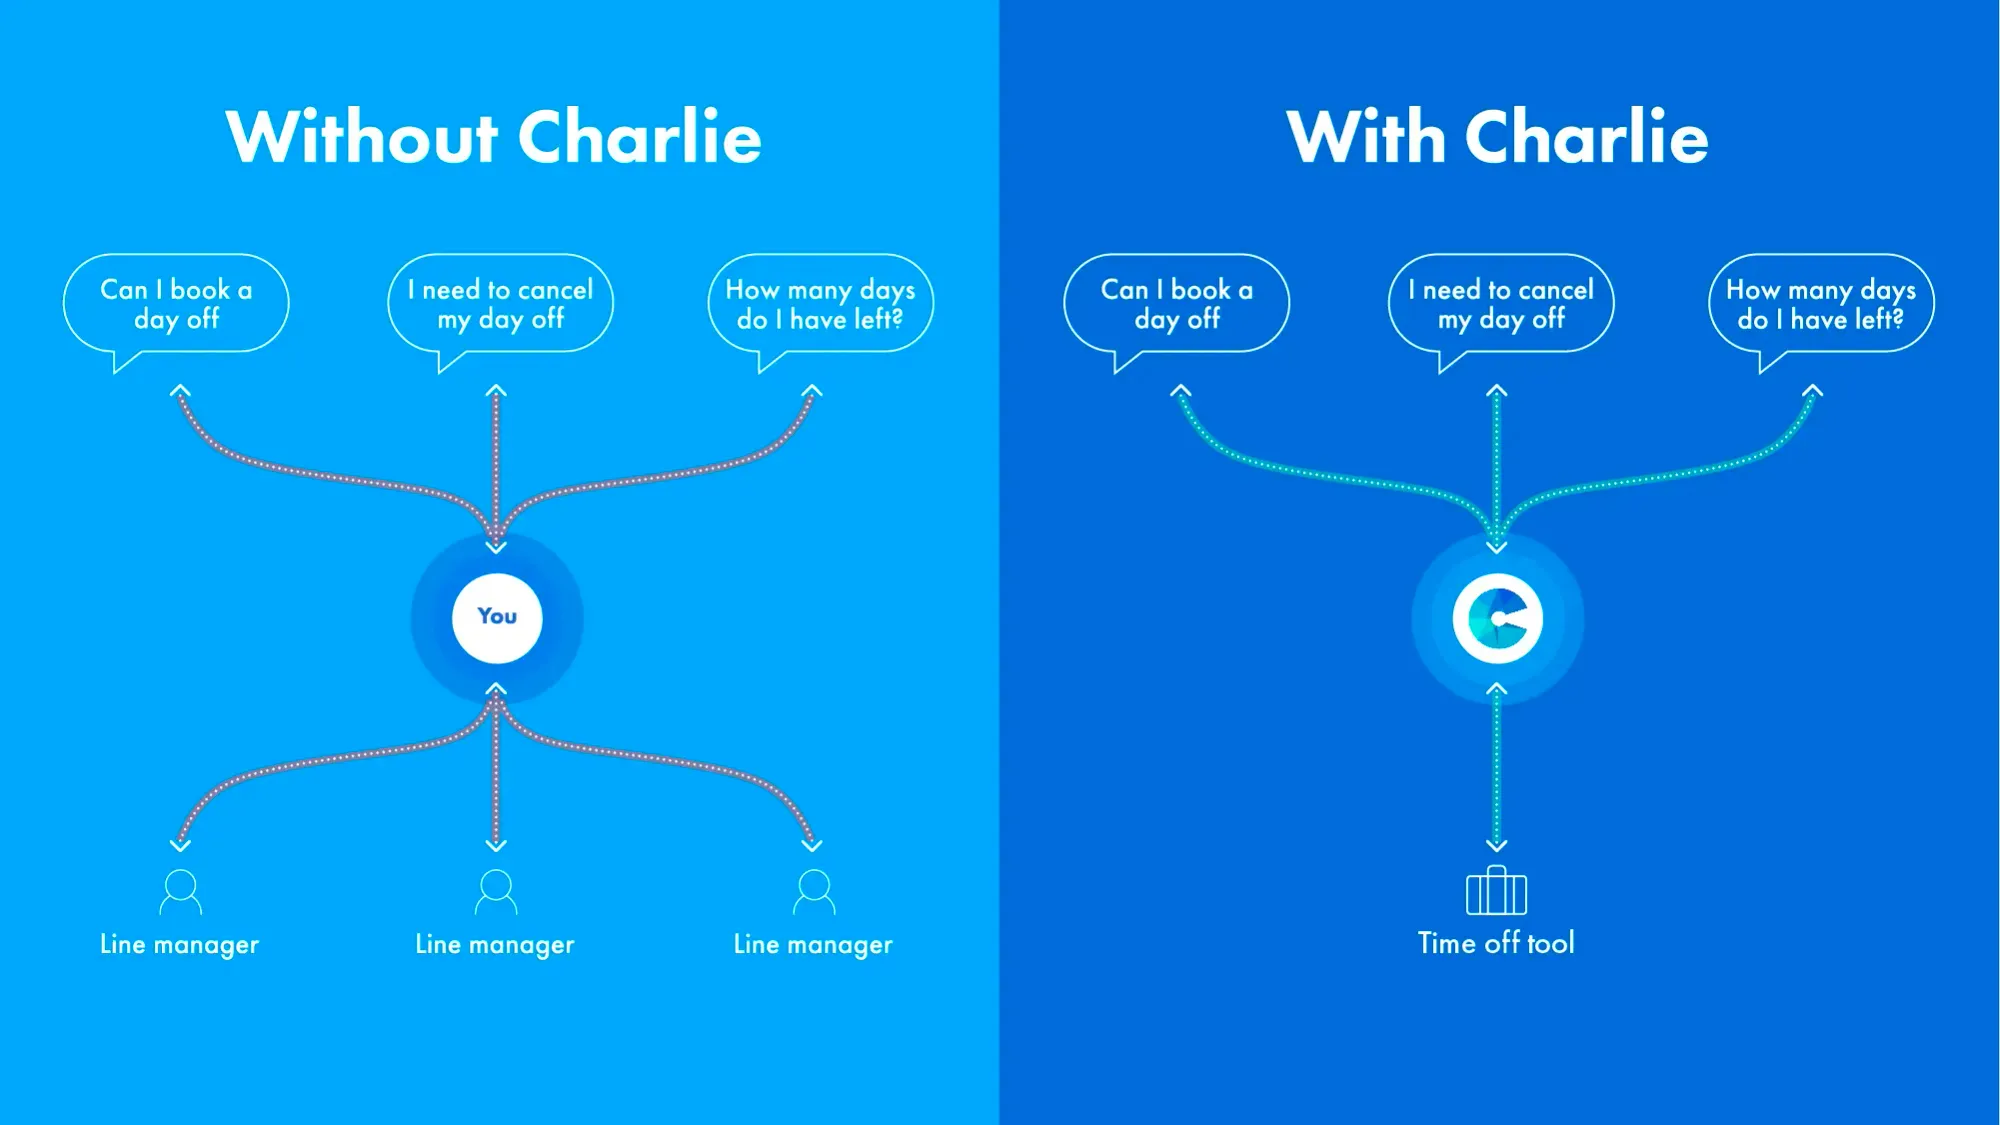 Diagram showing how easier it is to manage time off with CharlieHR